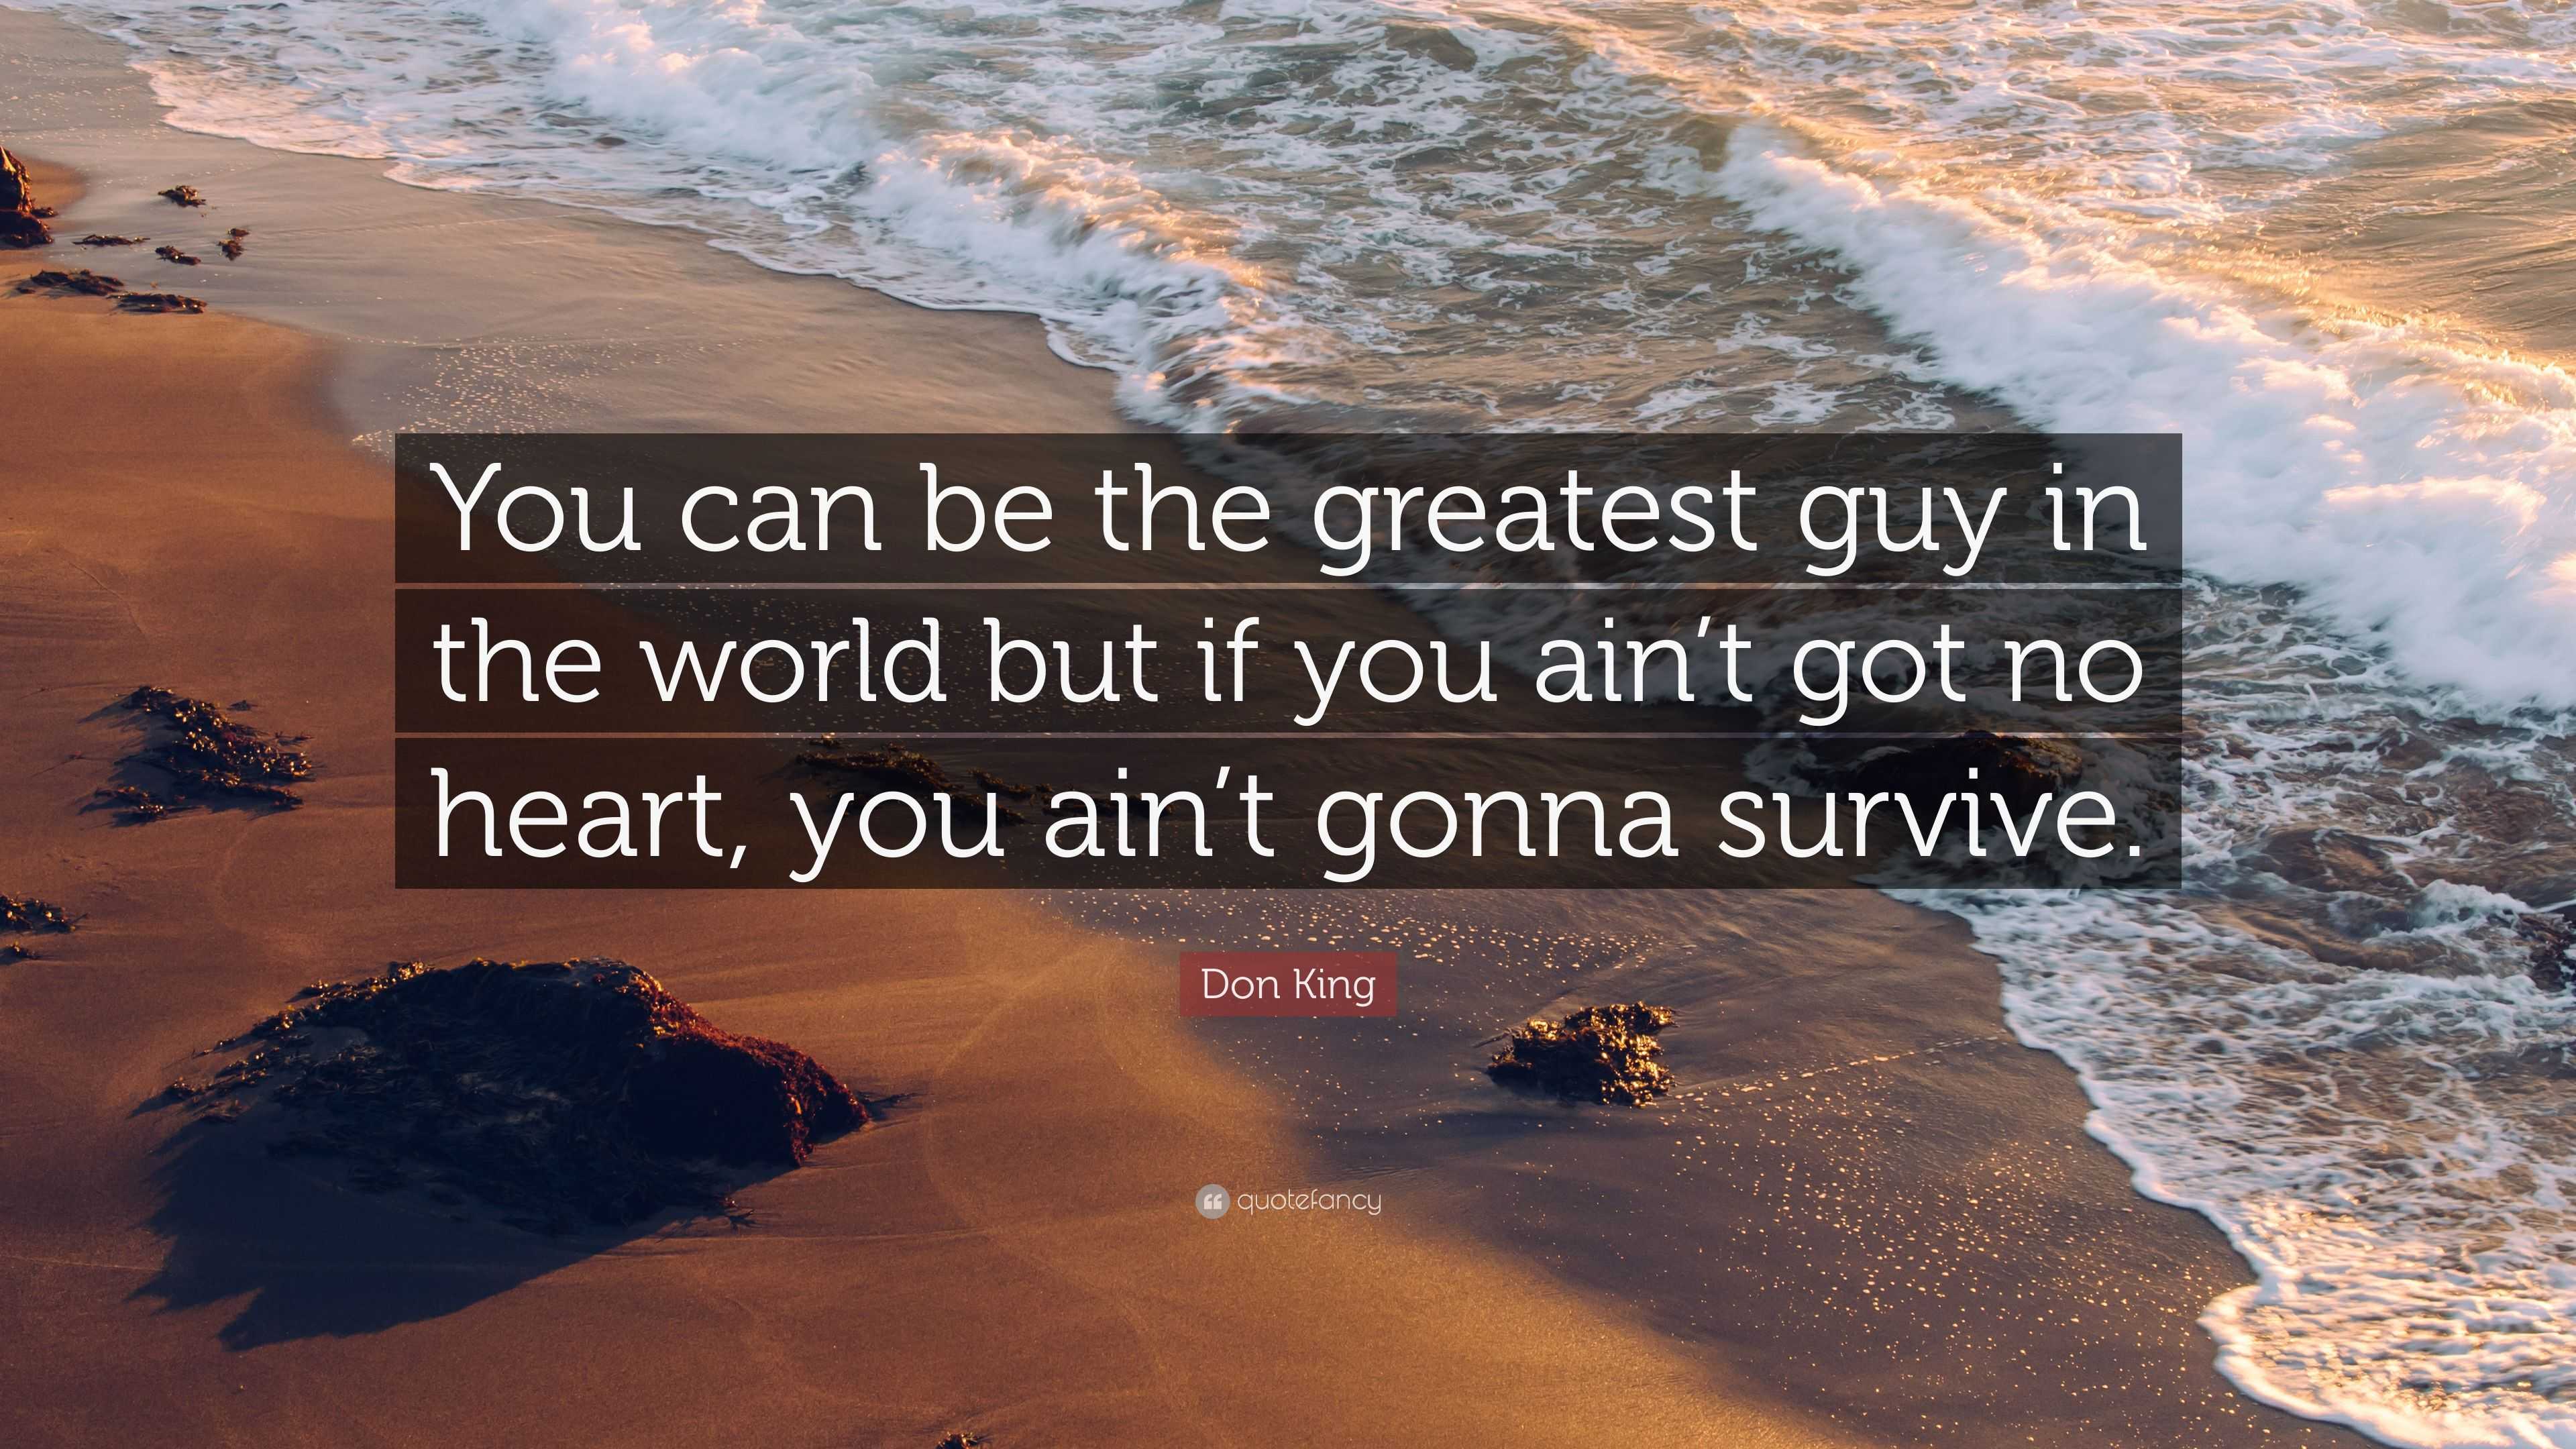 Don King Quote: “You can be the greatest guy in the world but if you ain